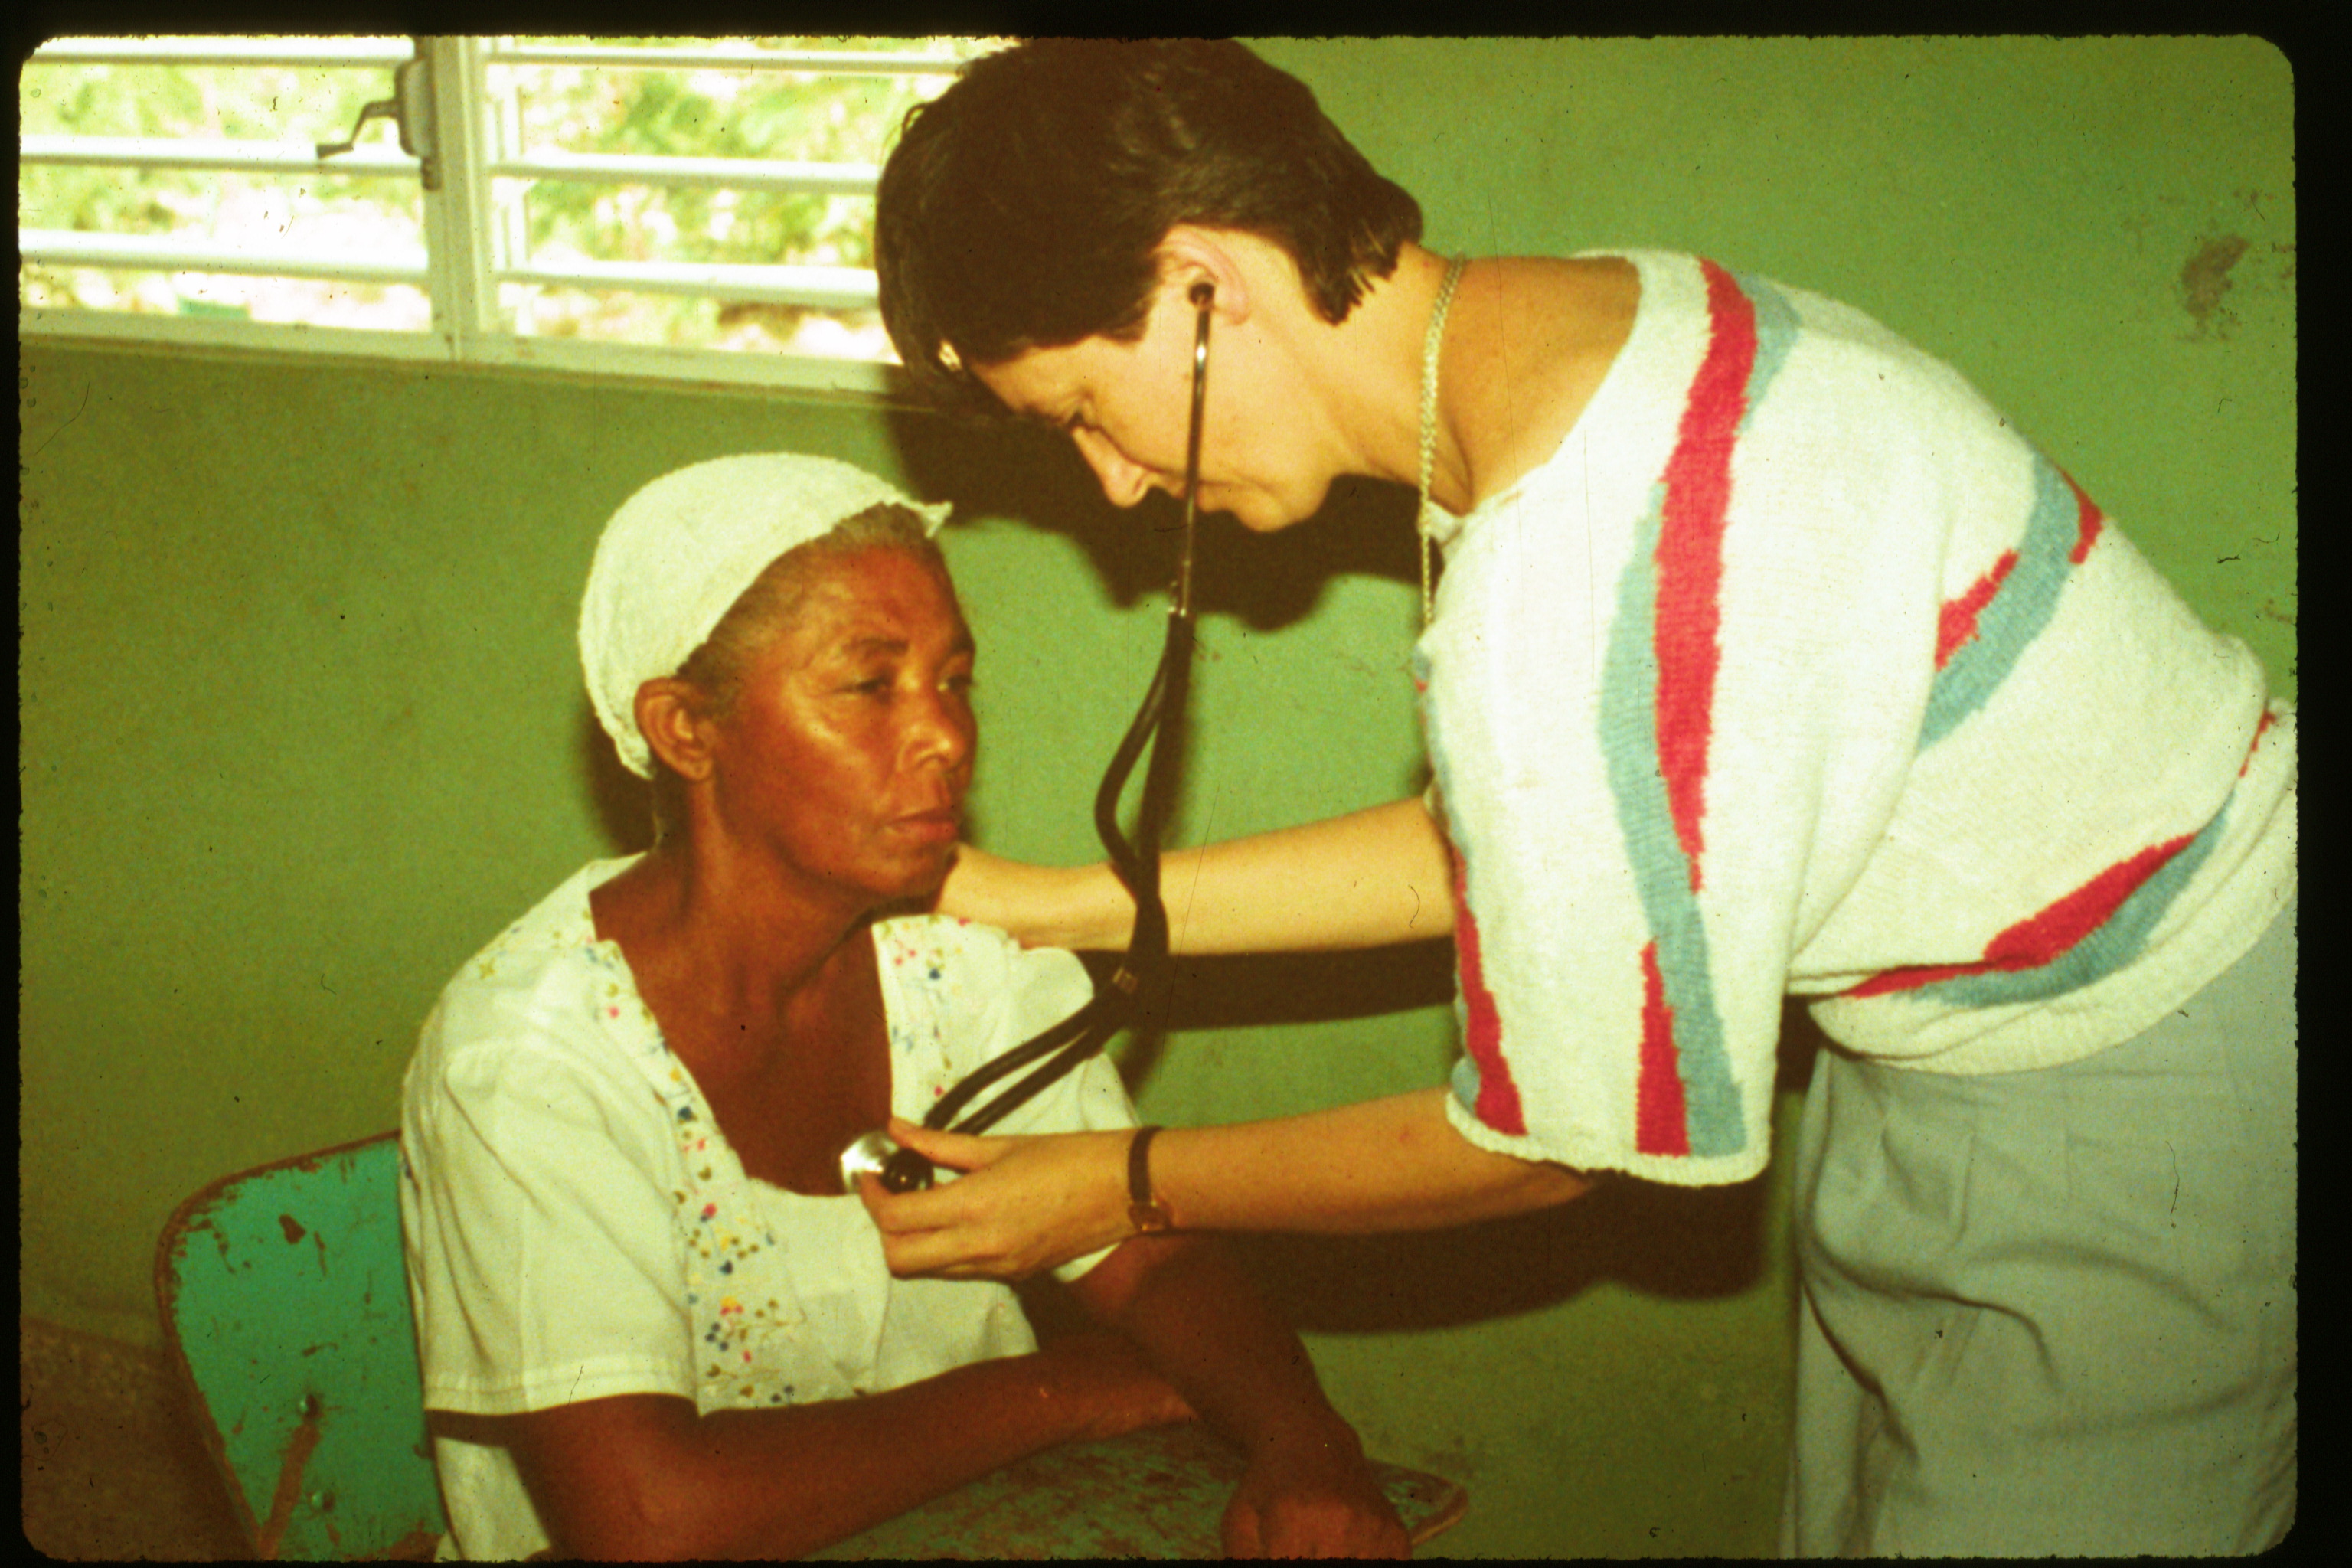 Examining patient medical outreach Dominican republic